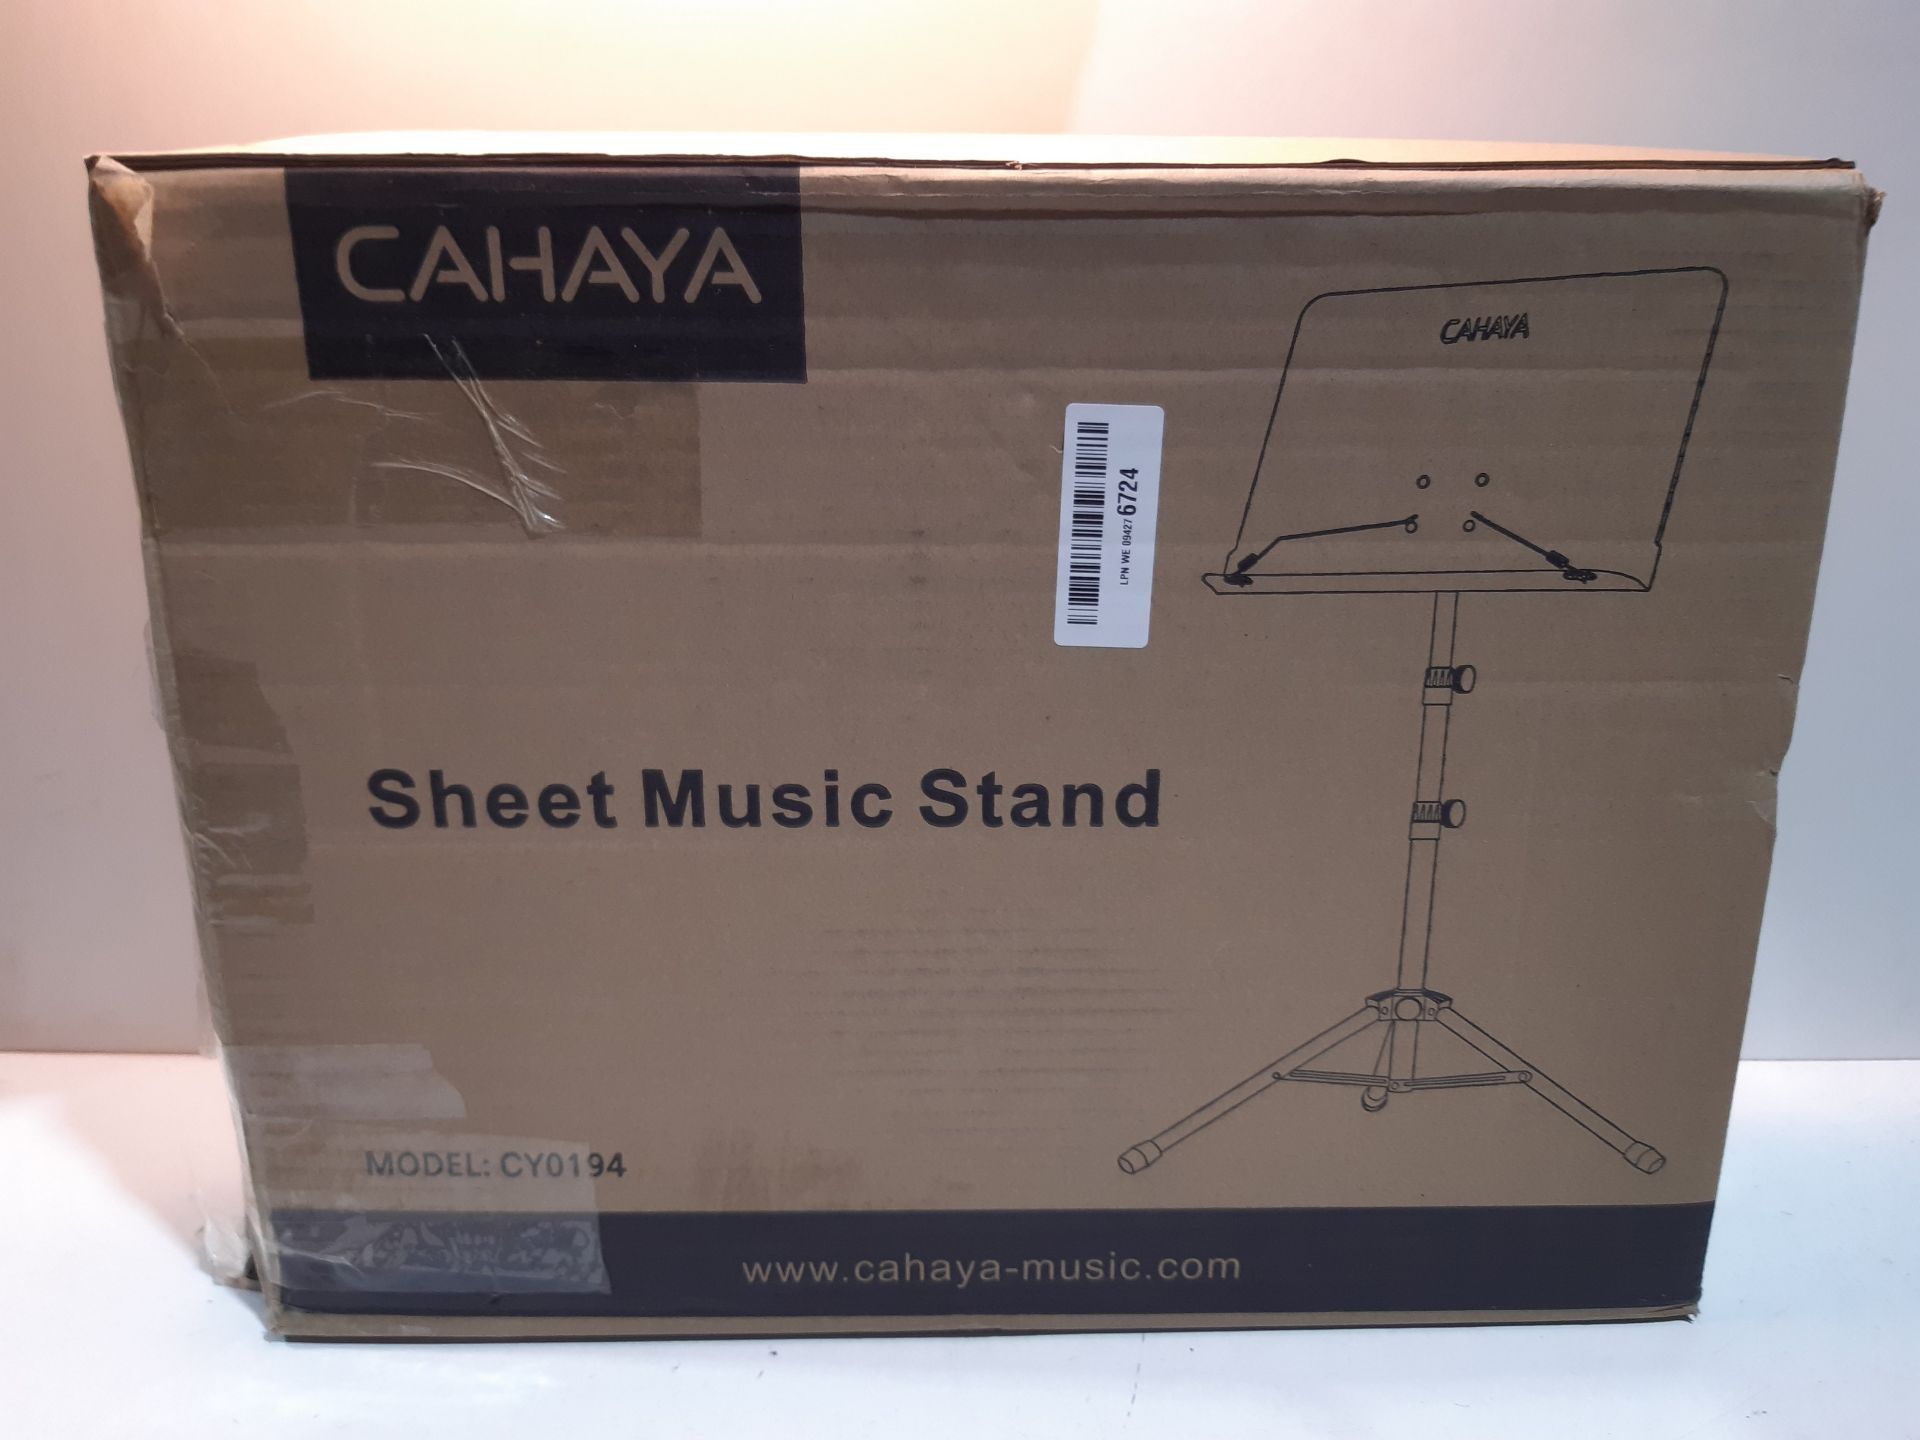 RRP £22.09 CAHAYA Sheet Music Stand Metal Portable with Carrying Bag - Image 2 of 2